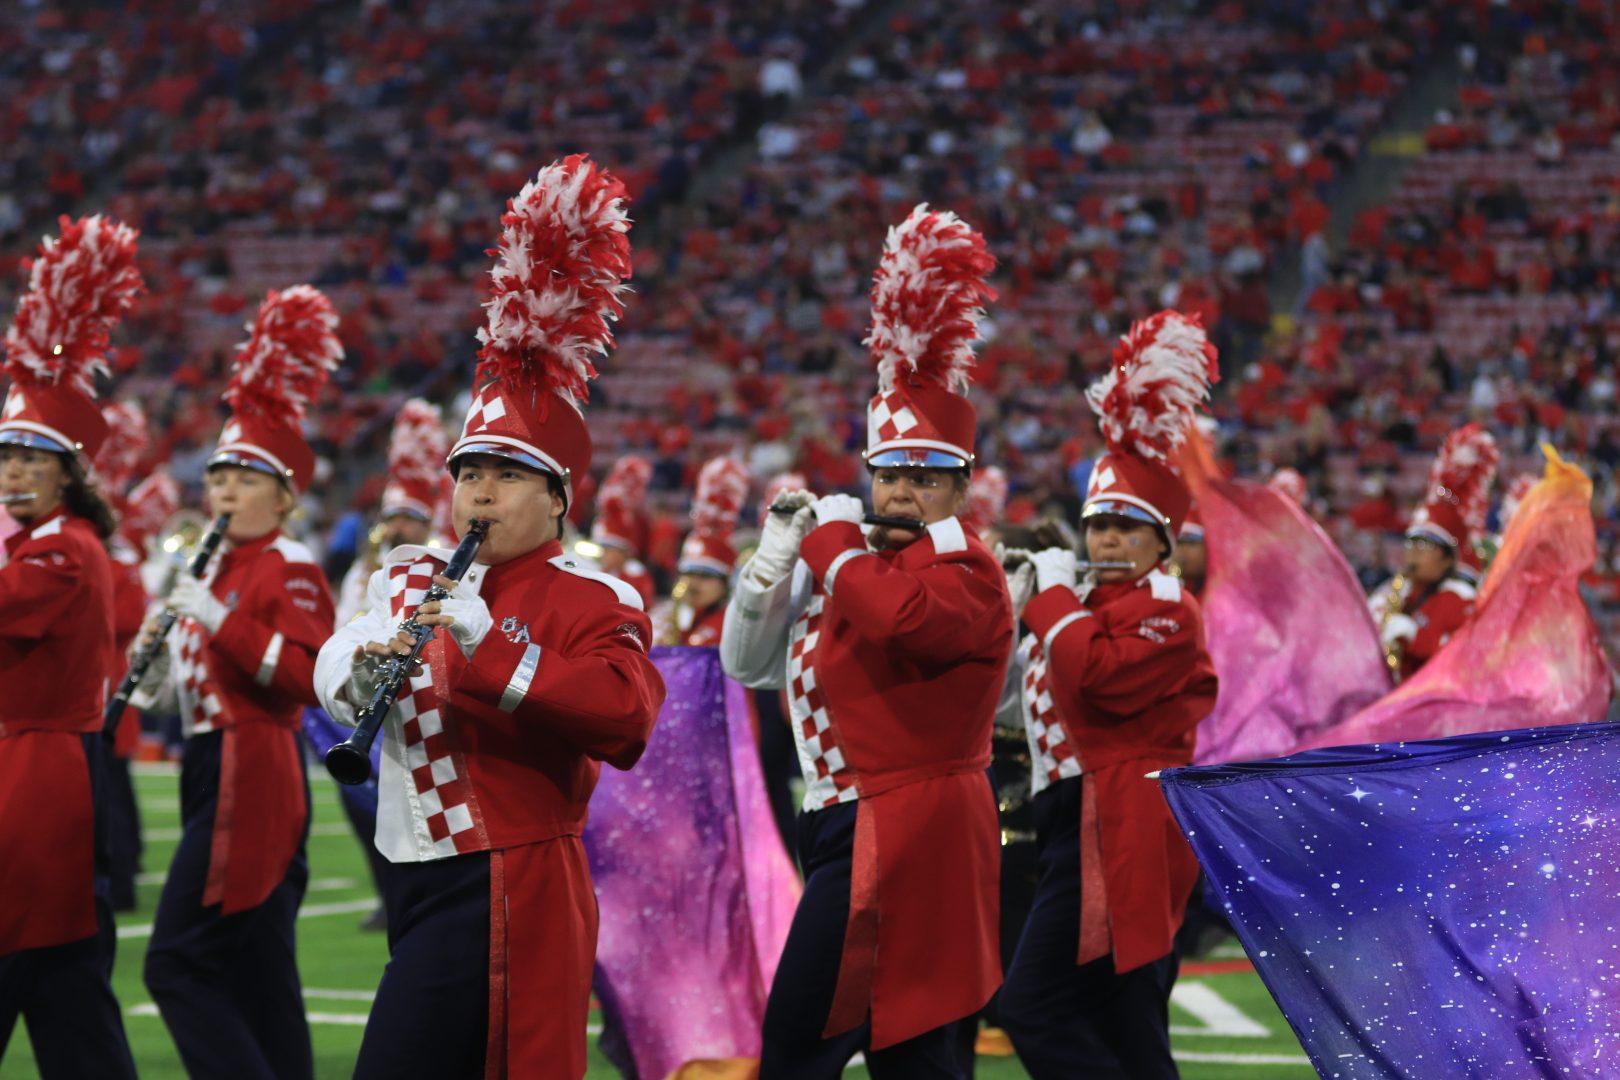 The Bulldog Marching Band performs before a sold out crowd during a Fresno State football game. (Melina Kazanjian/The Collegian)